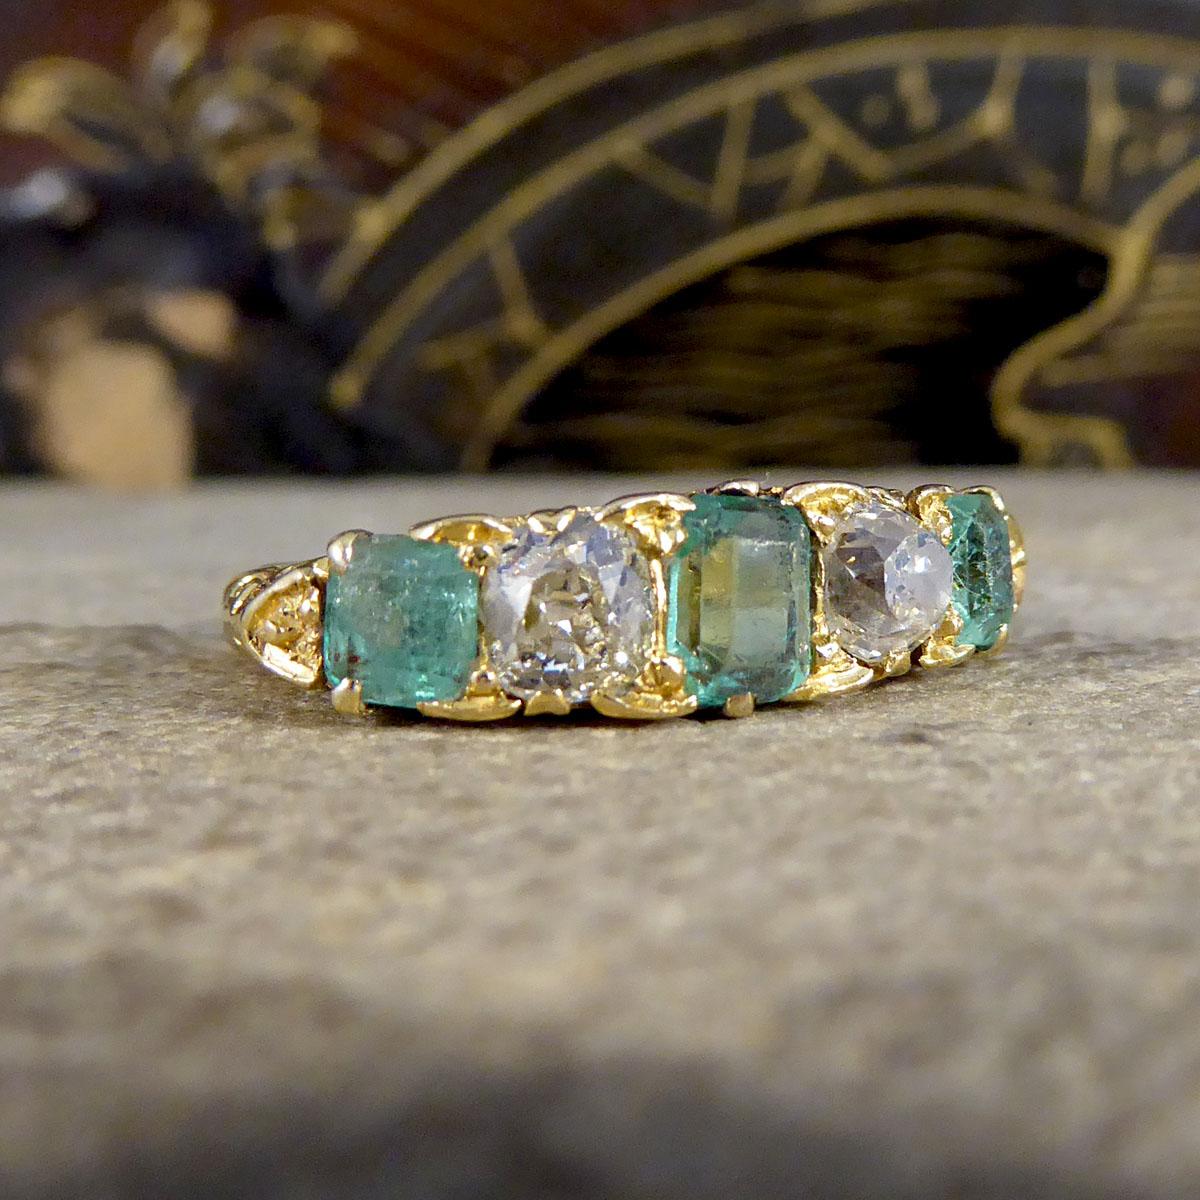 This antique ring was crafted in the late Victorian era. It features a classic swirl gallery and is set in 18ct yellow gold. The emeralds are light and beautiful in colour with an even colour distribution, and have wear and tear that is consistent